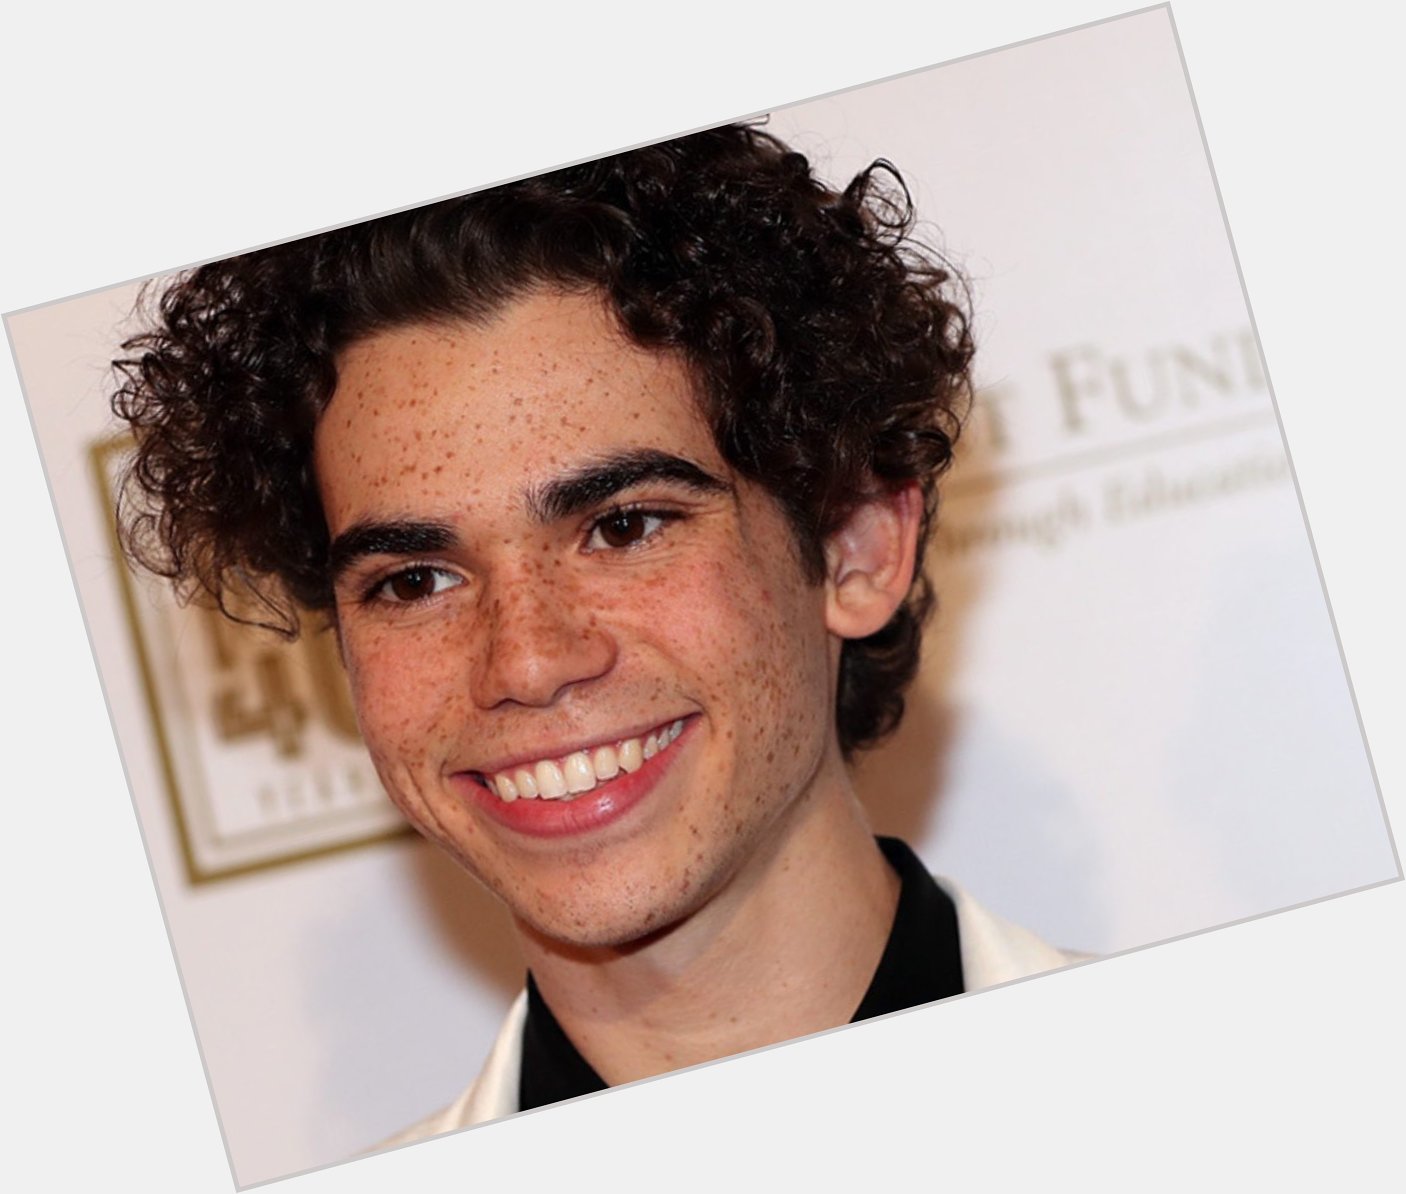 He would ve turned 21 today. Happy birthday Cameron Boyce   